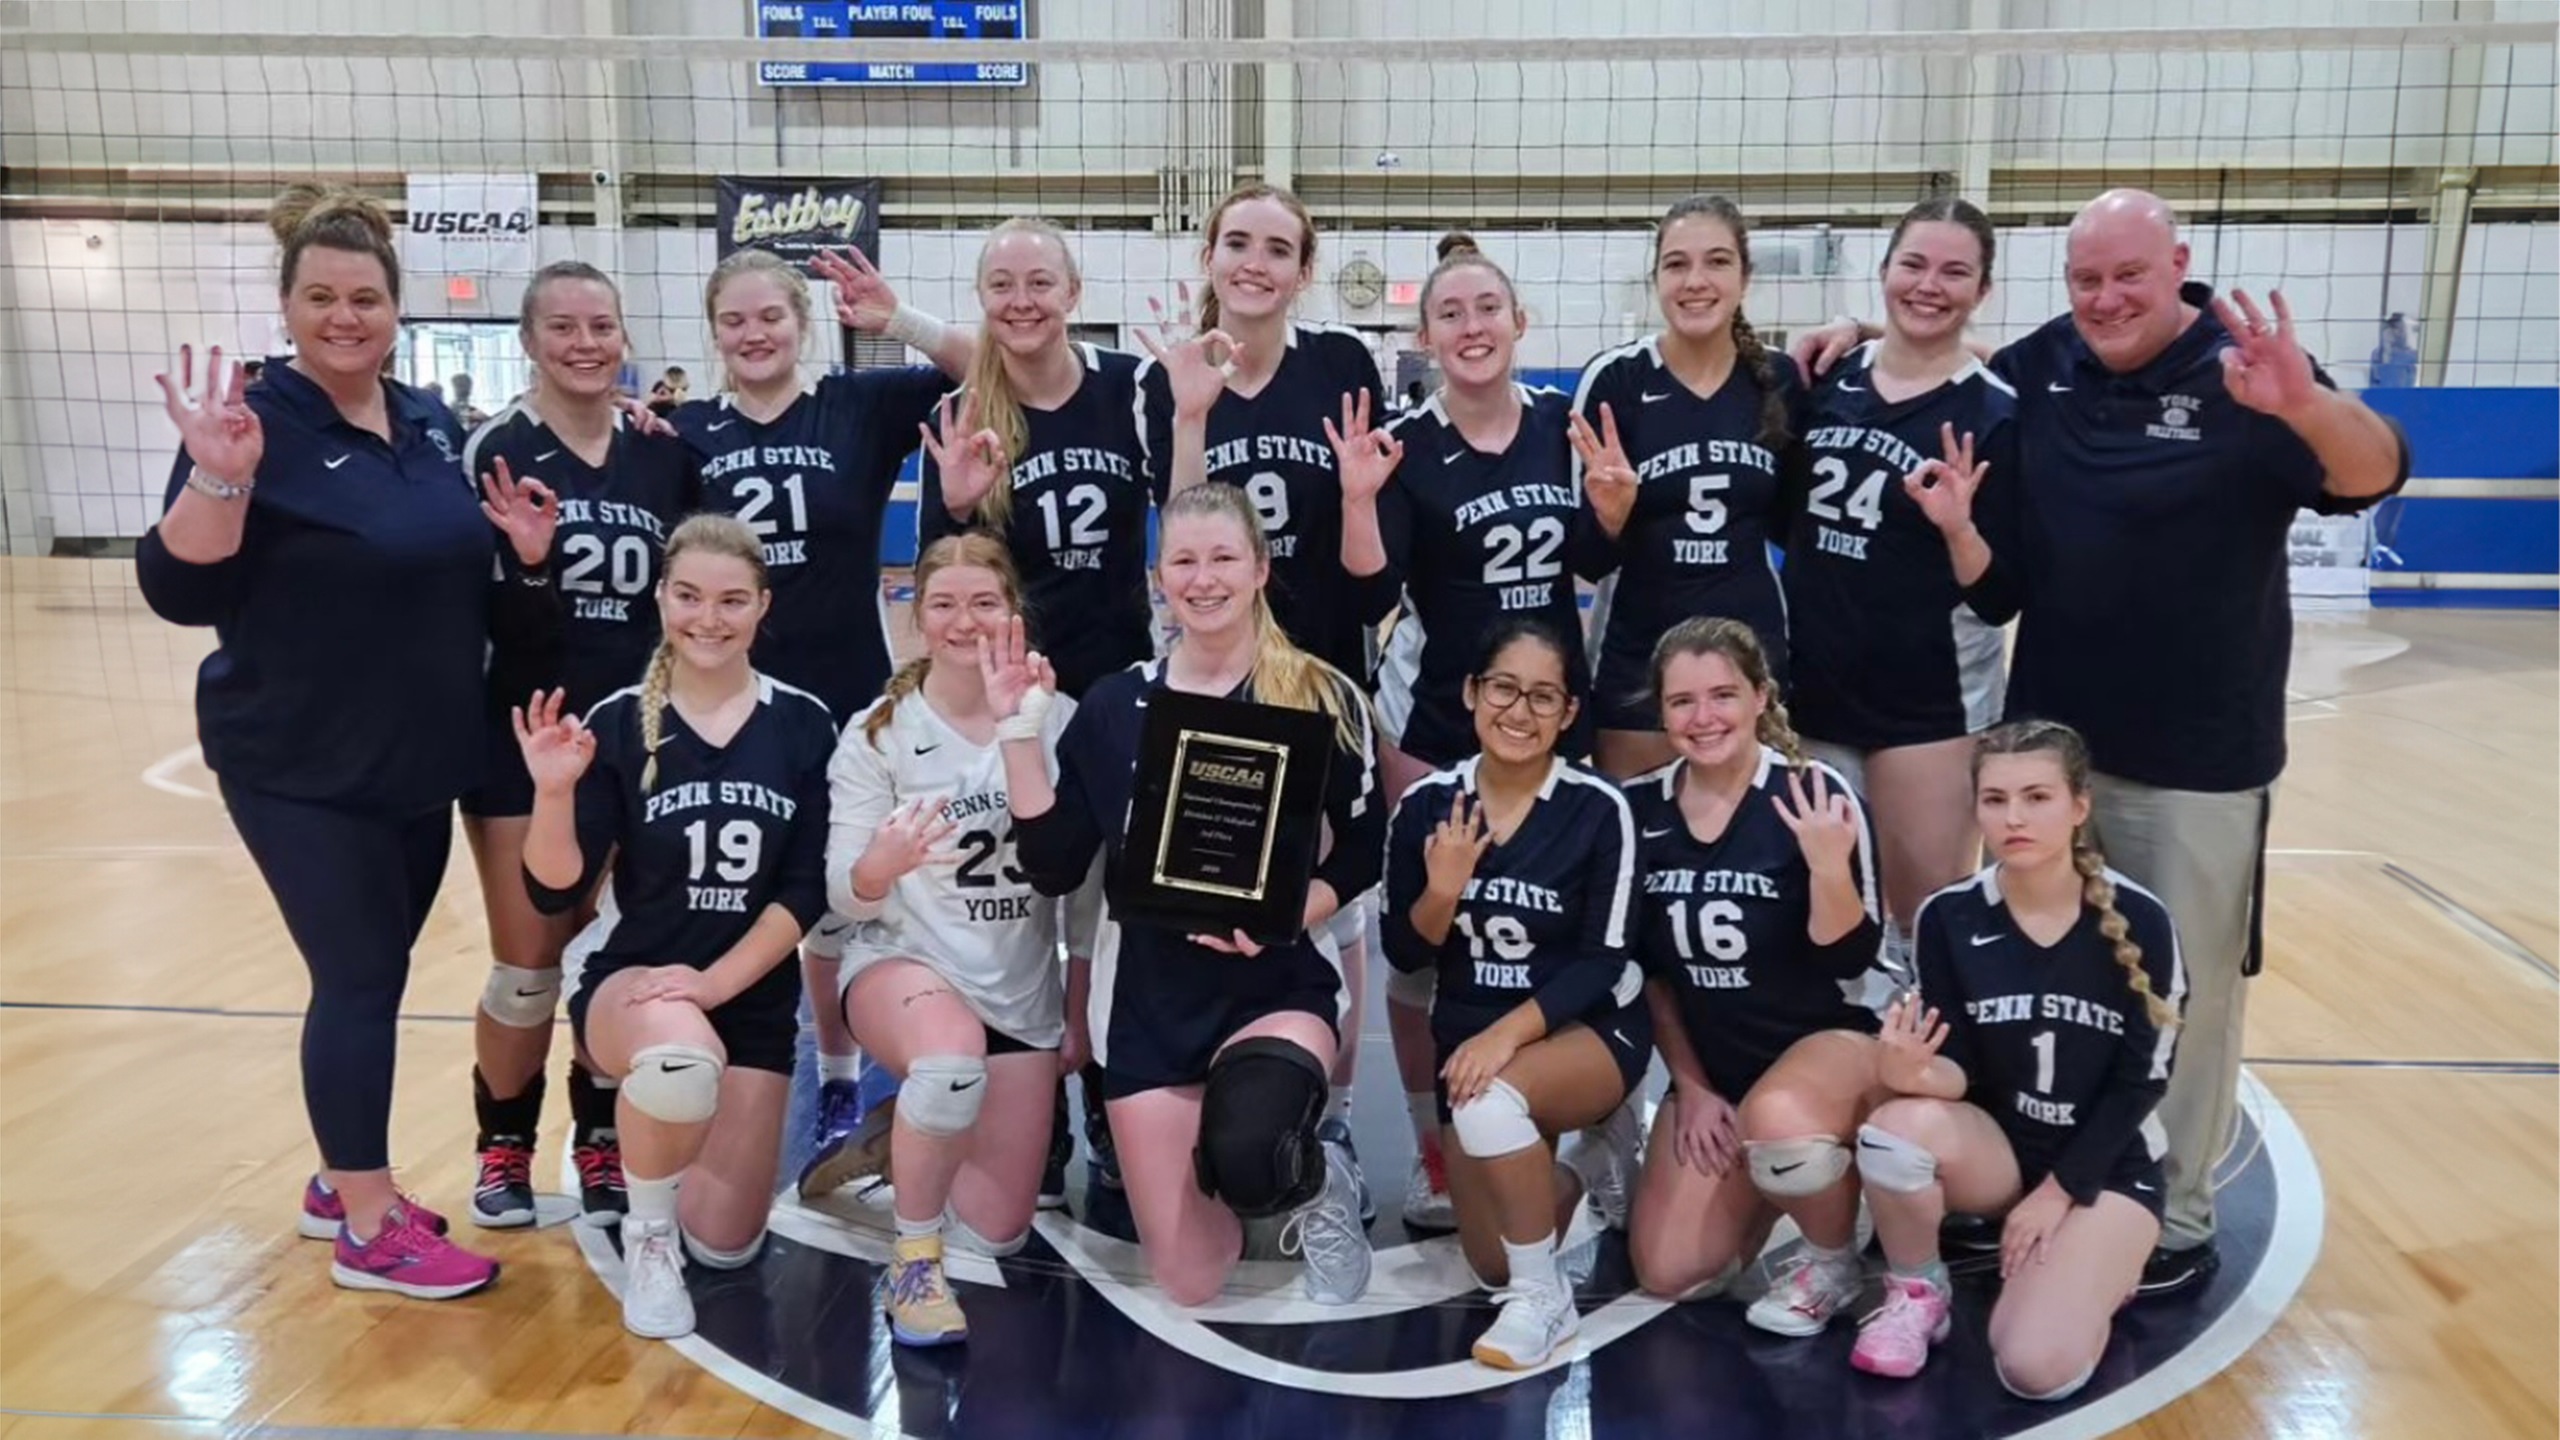 York Takes Third Place at USCAA National Championship